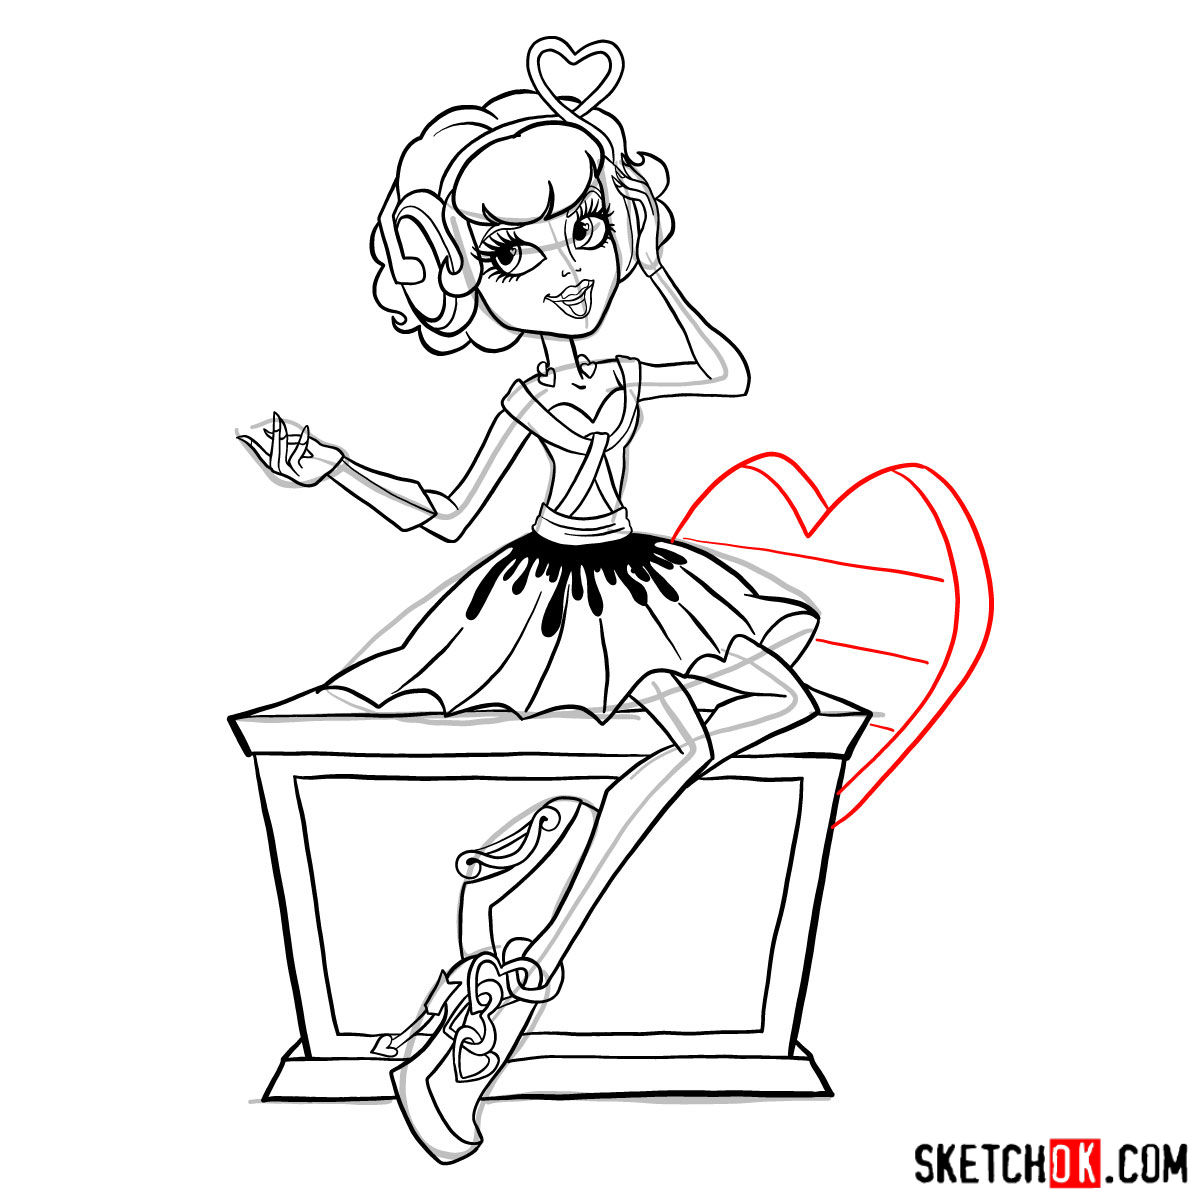 How to draw C.A. Cupid step by step - step 17